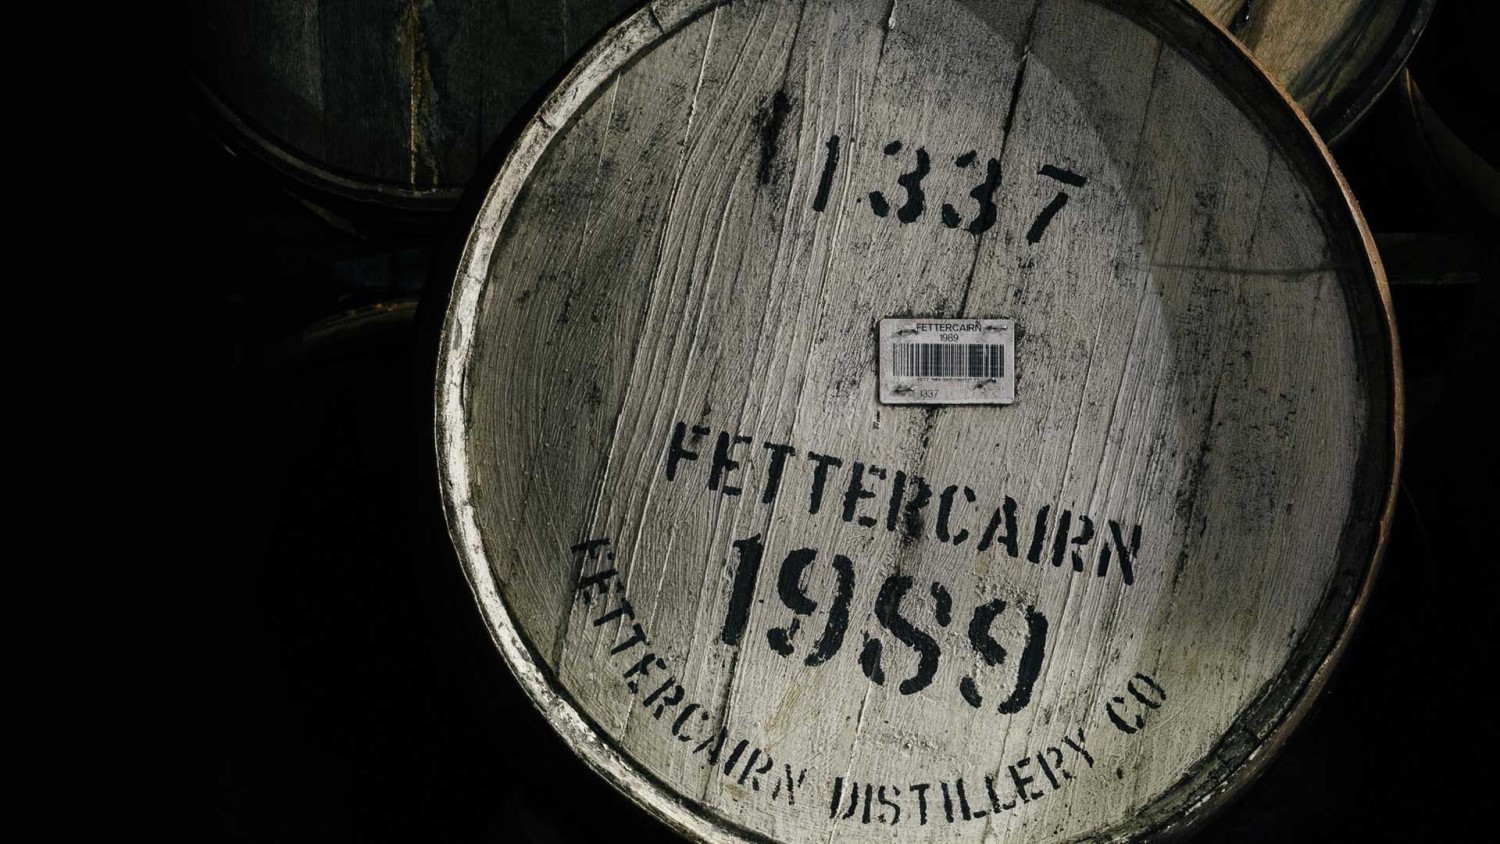 Fettercairn have whiskies as old as 55 years in their warehouse